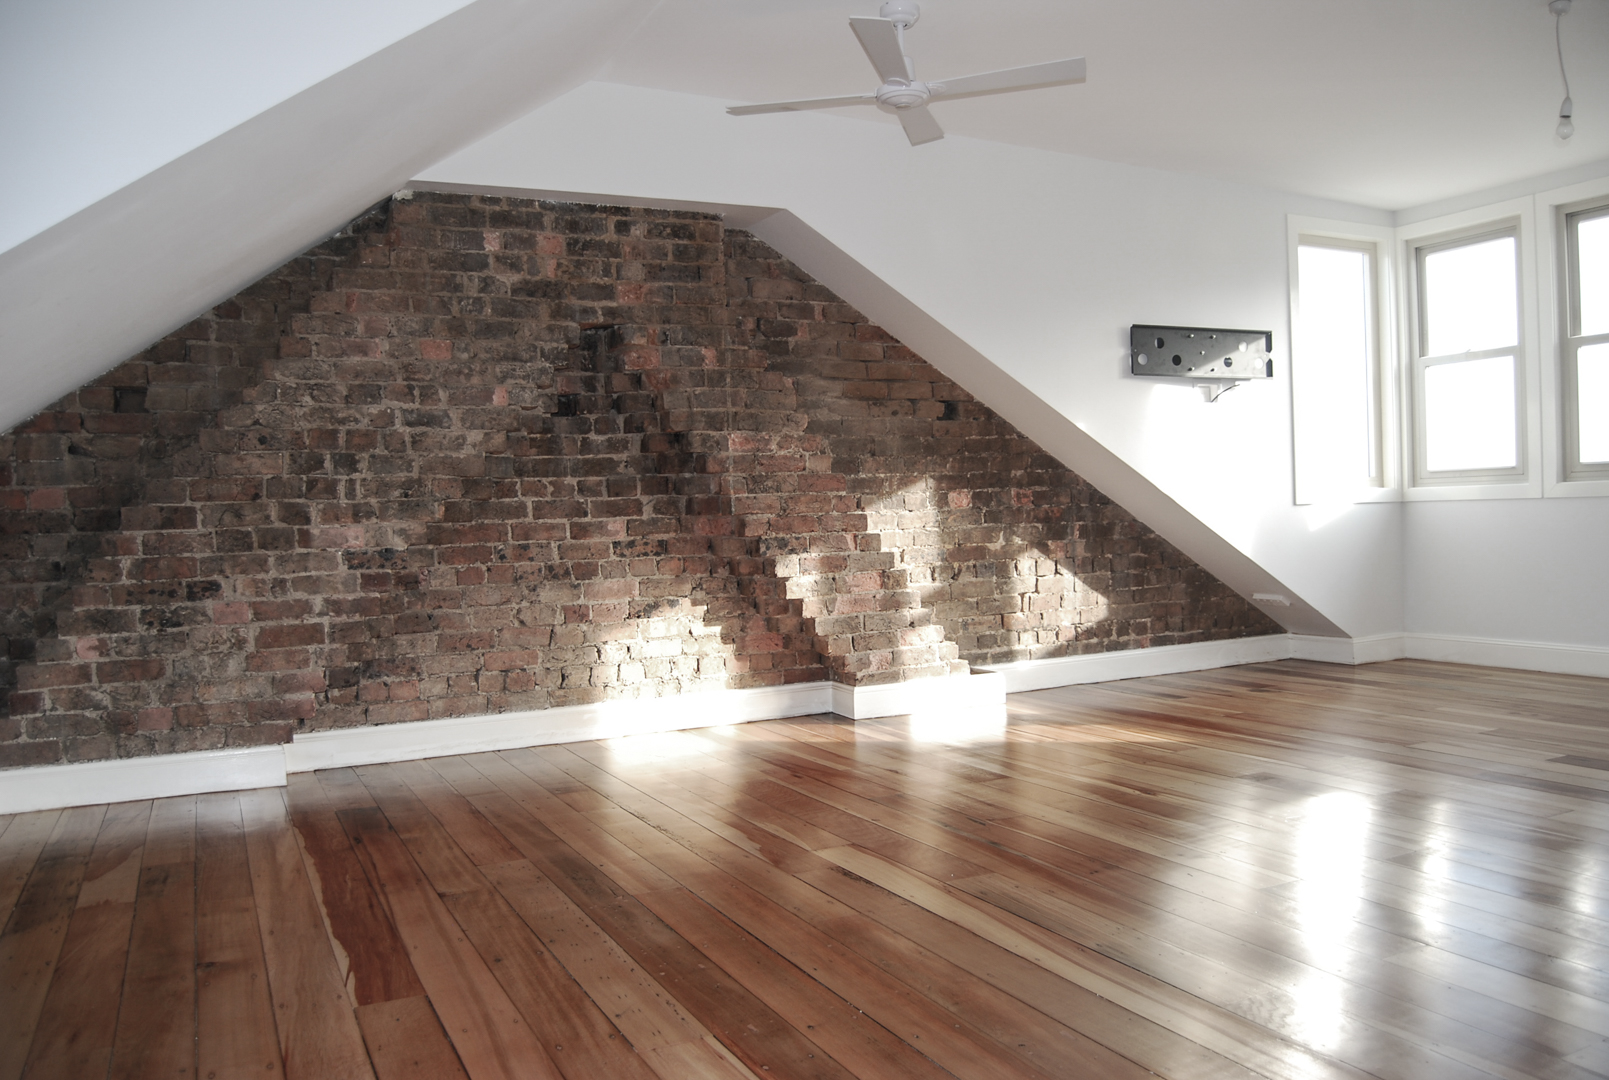 Existing brickwork combined with new walls in attic conversion